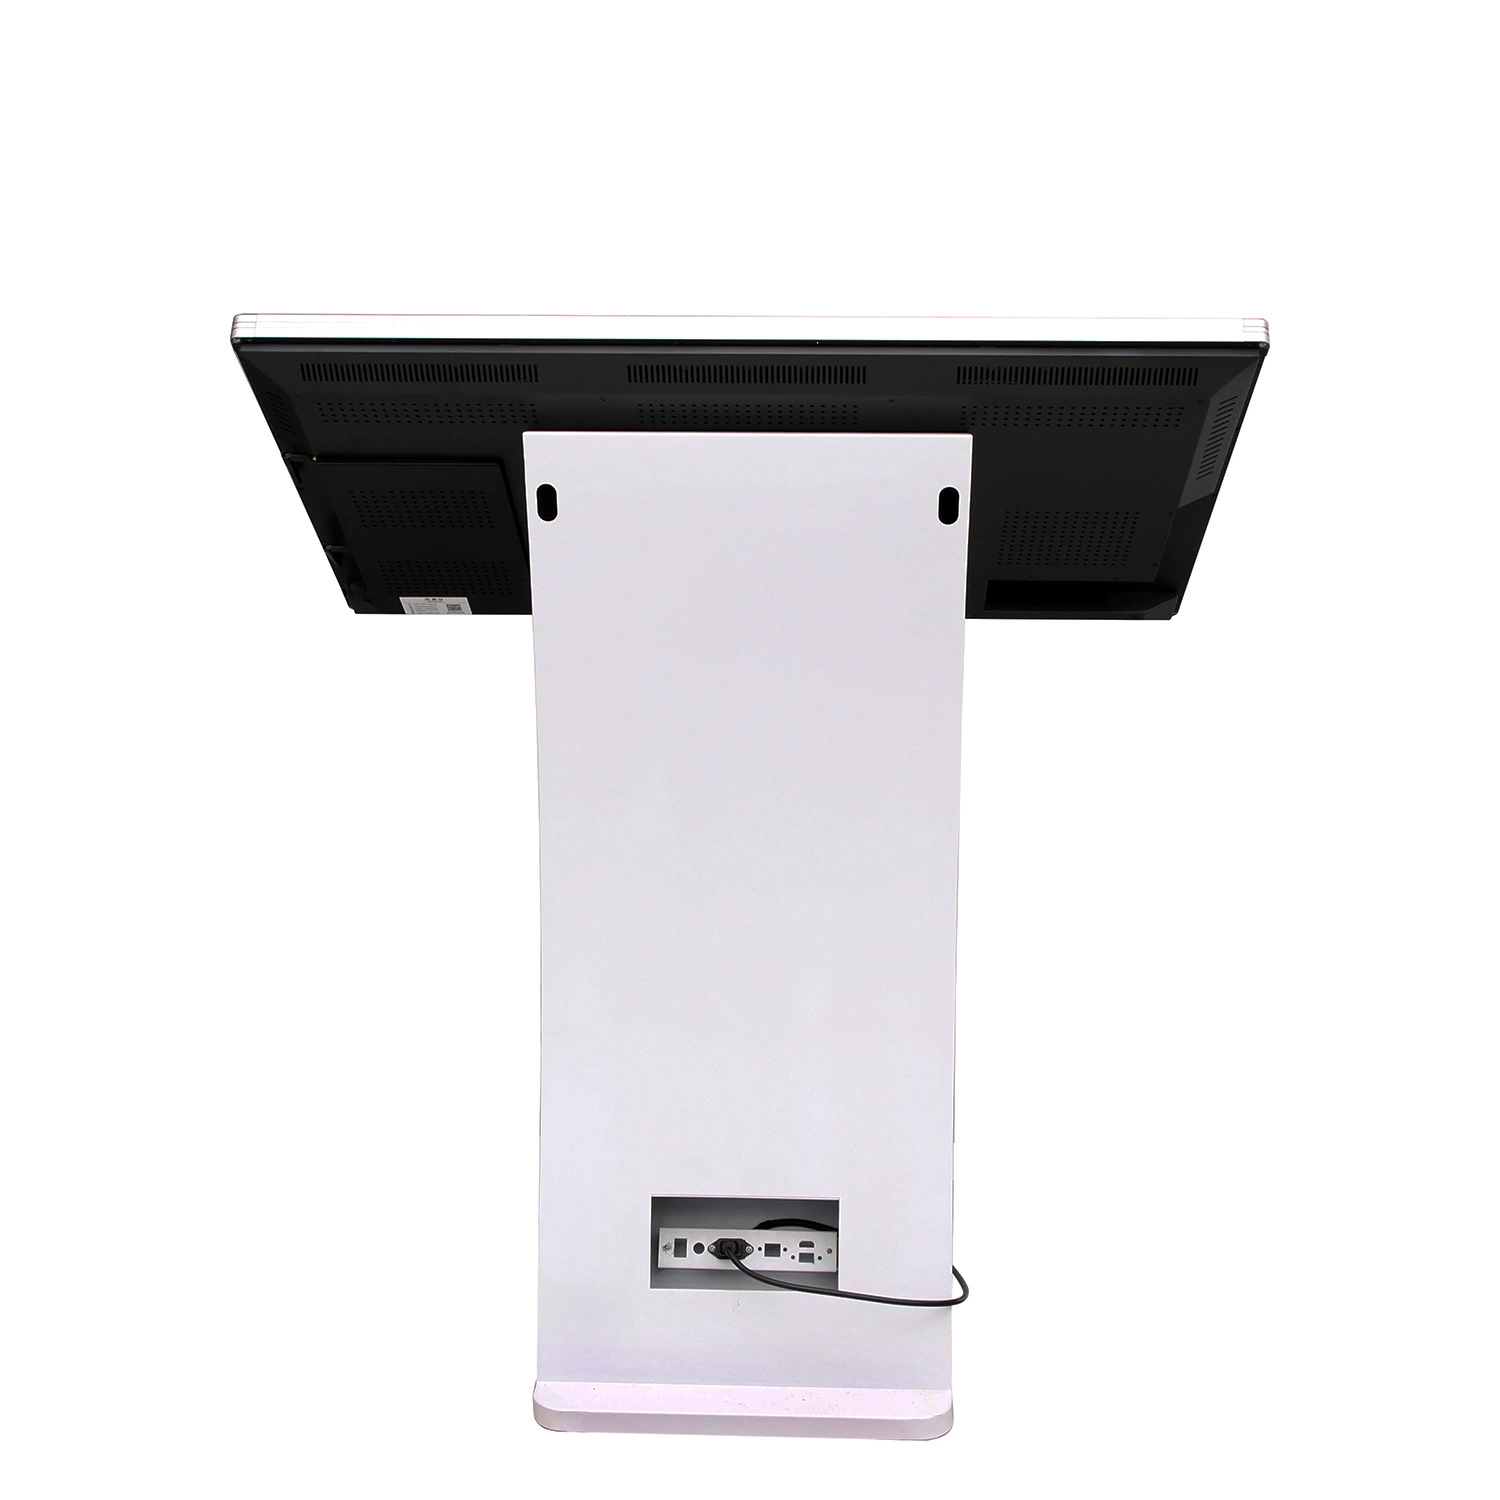 Shopping Mall Self Service Ordering Payment Kiosk Machine W/Thermal Printer